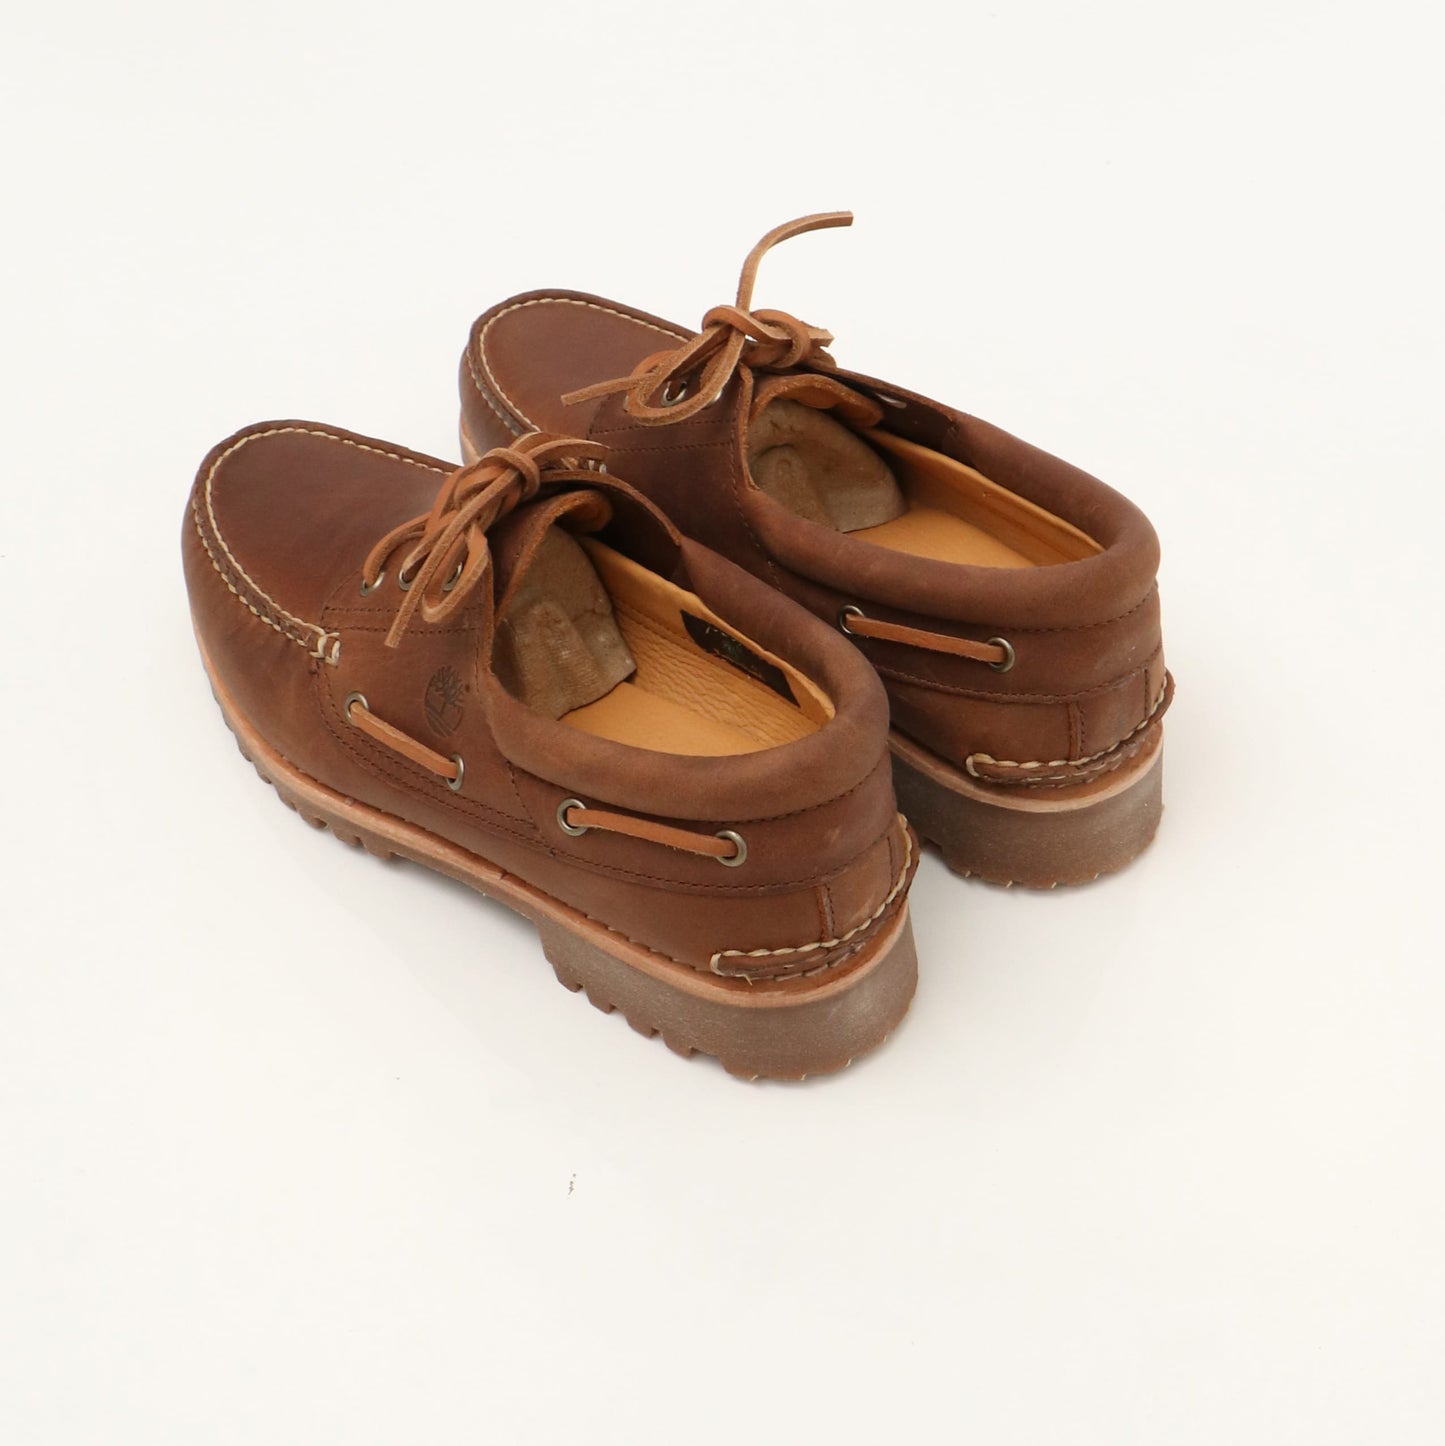 AUTHENTIC HANDSEWN BOAT SHOES